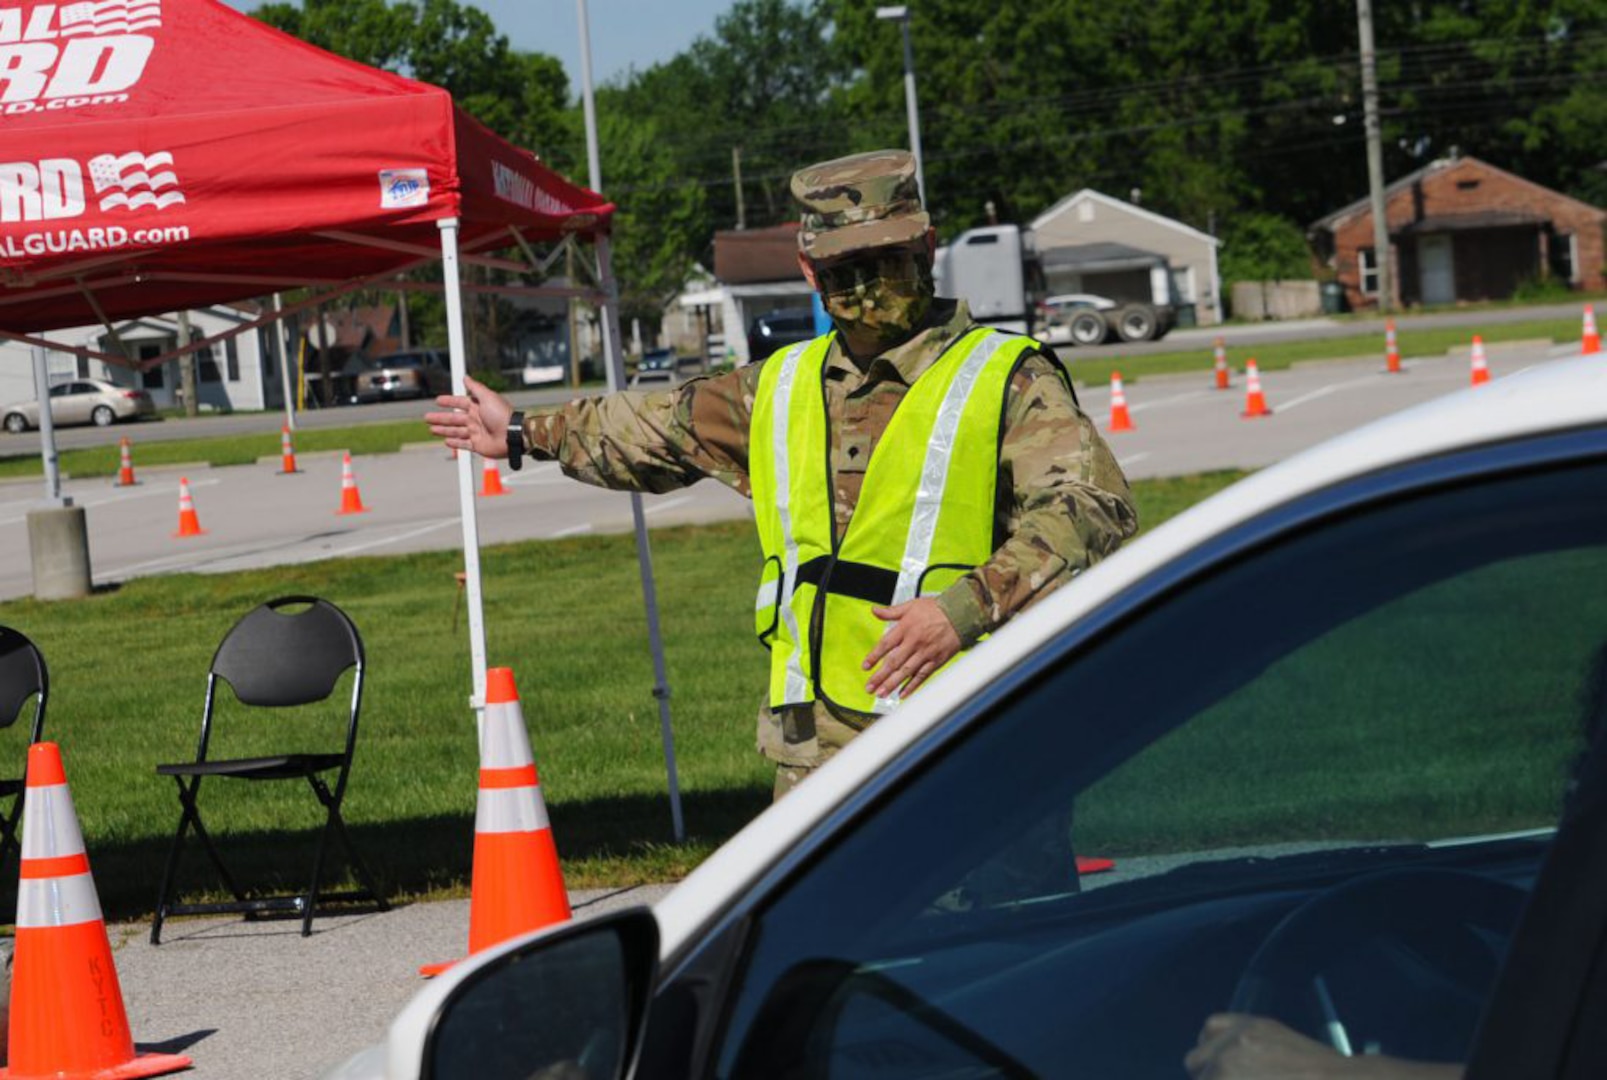 Kentucky National Guard Spc. Robert Acosta directs traffic at Lexington’s drive-through testing site. The site is part of Kentucky’s efforts to increase COVID-19 testing rates throughout the state.